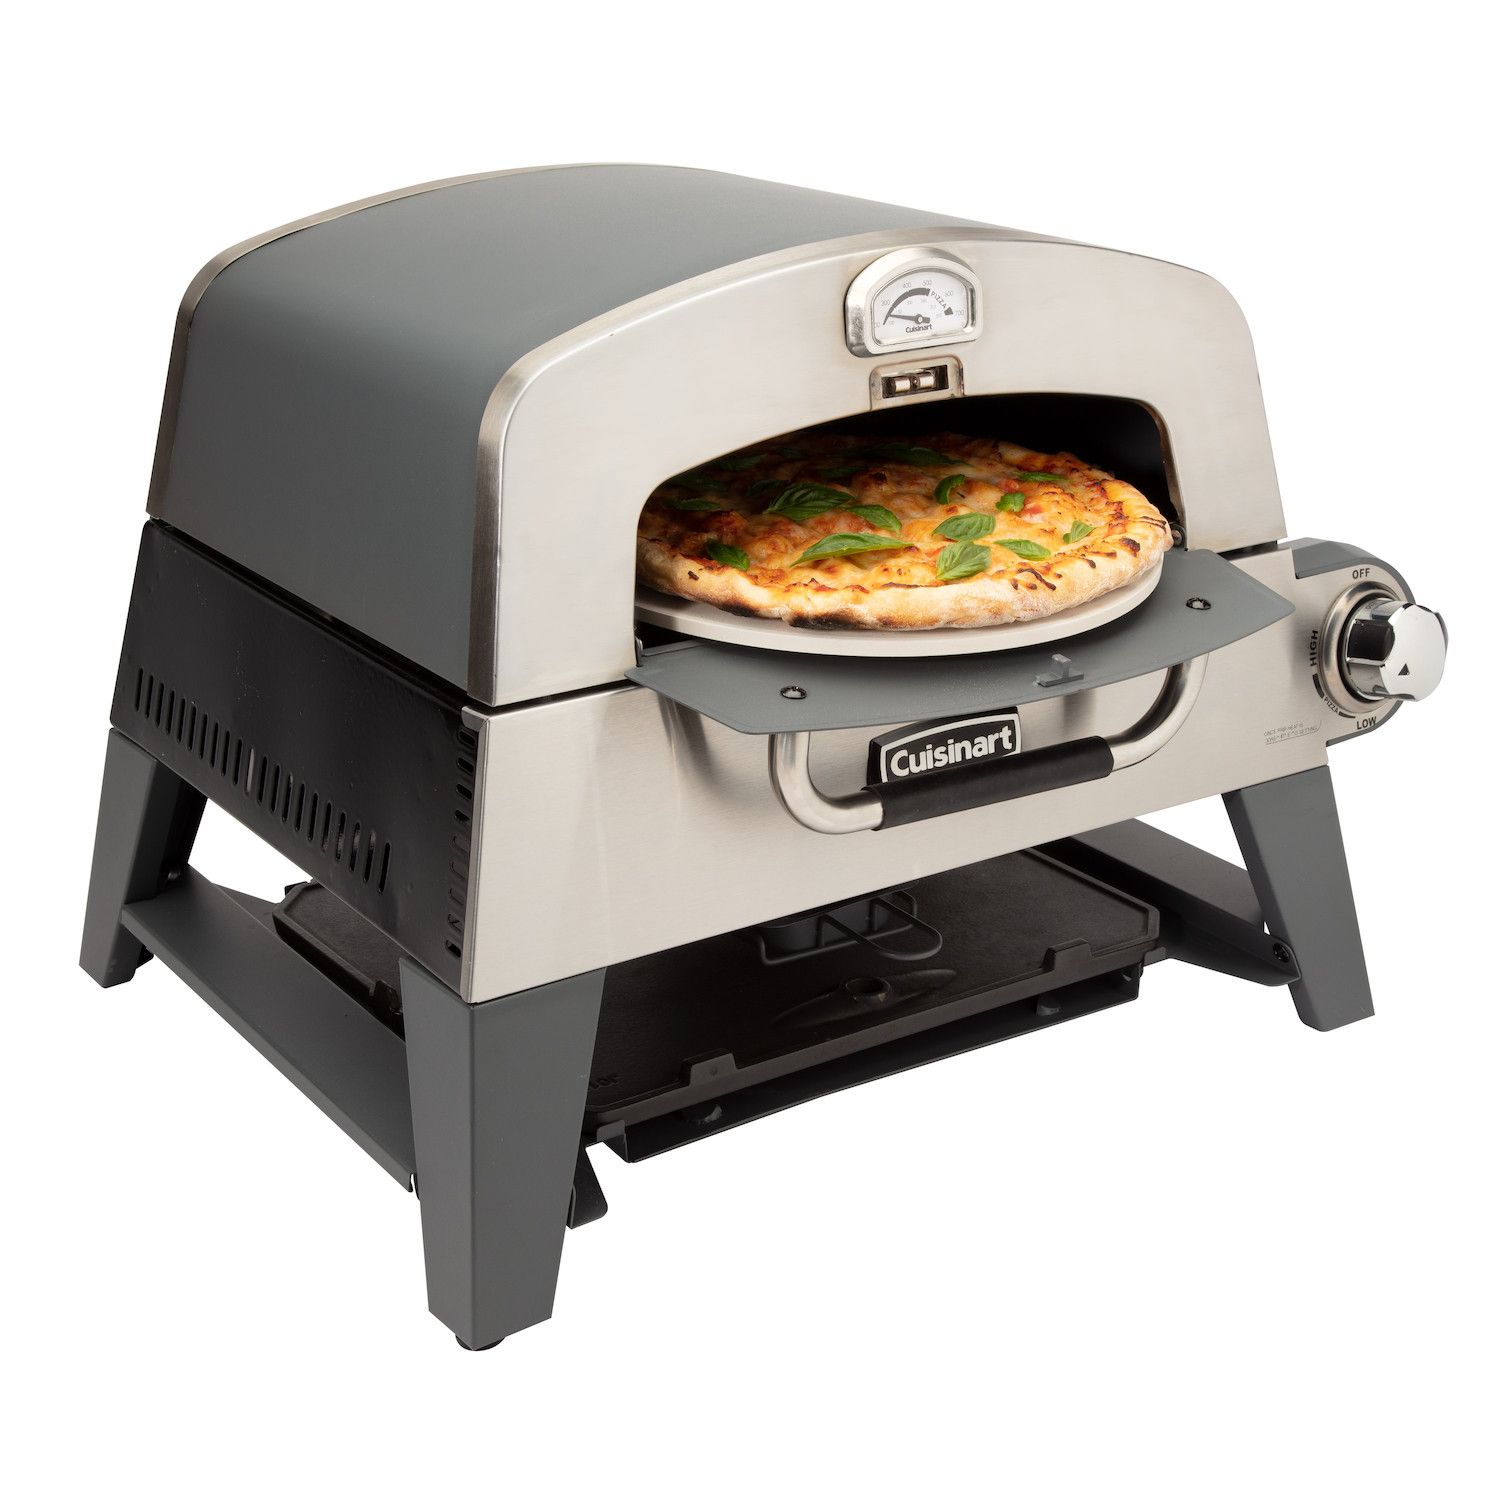 The Gemelli Home Electric Pizza Oven